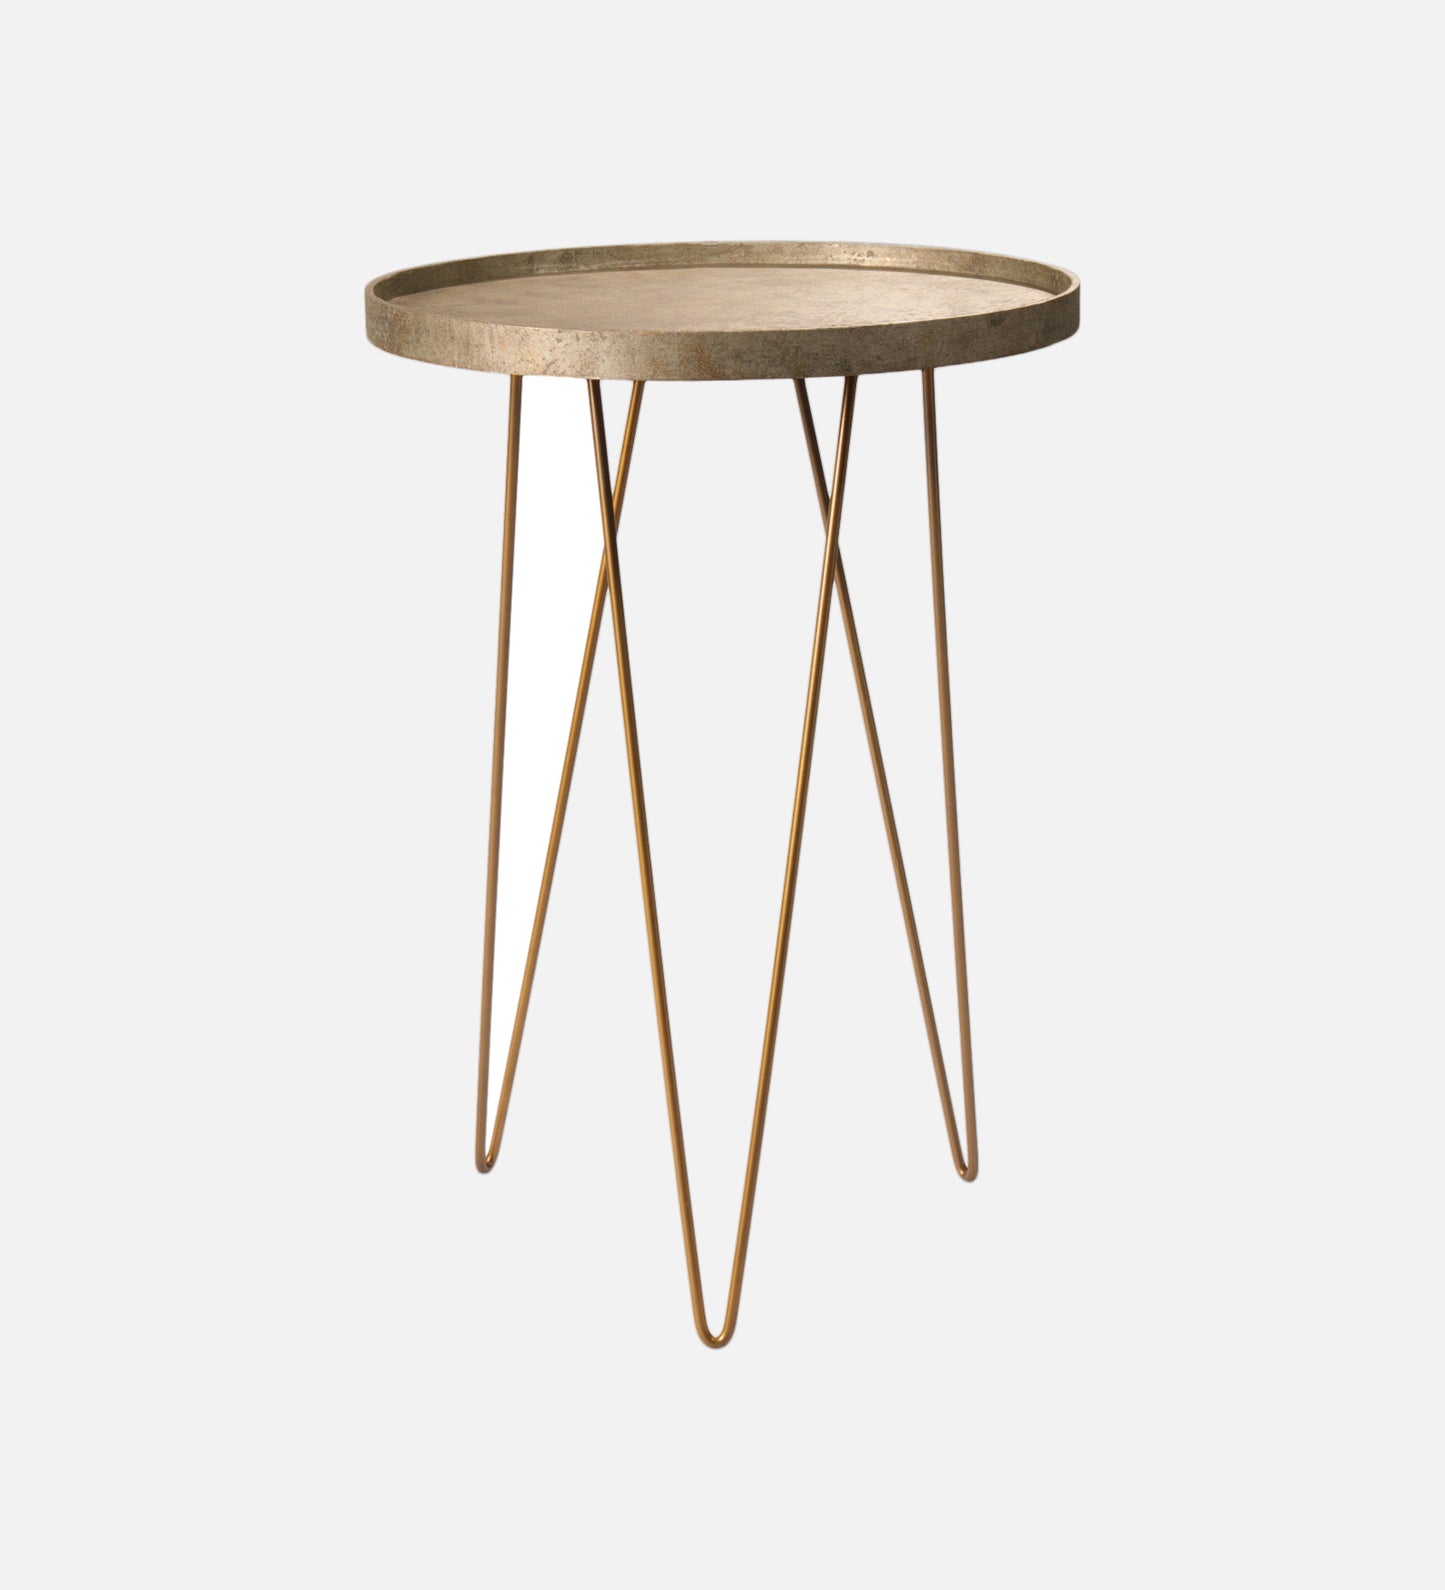 Transcendent Tinge Dark Gold Side Tables with Hairpin Legs, Wooden Tables, Living Room Decor by A Tiny Mistake